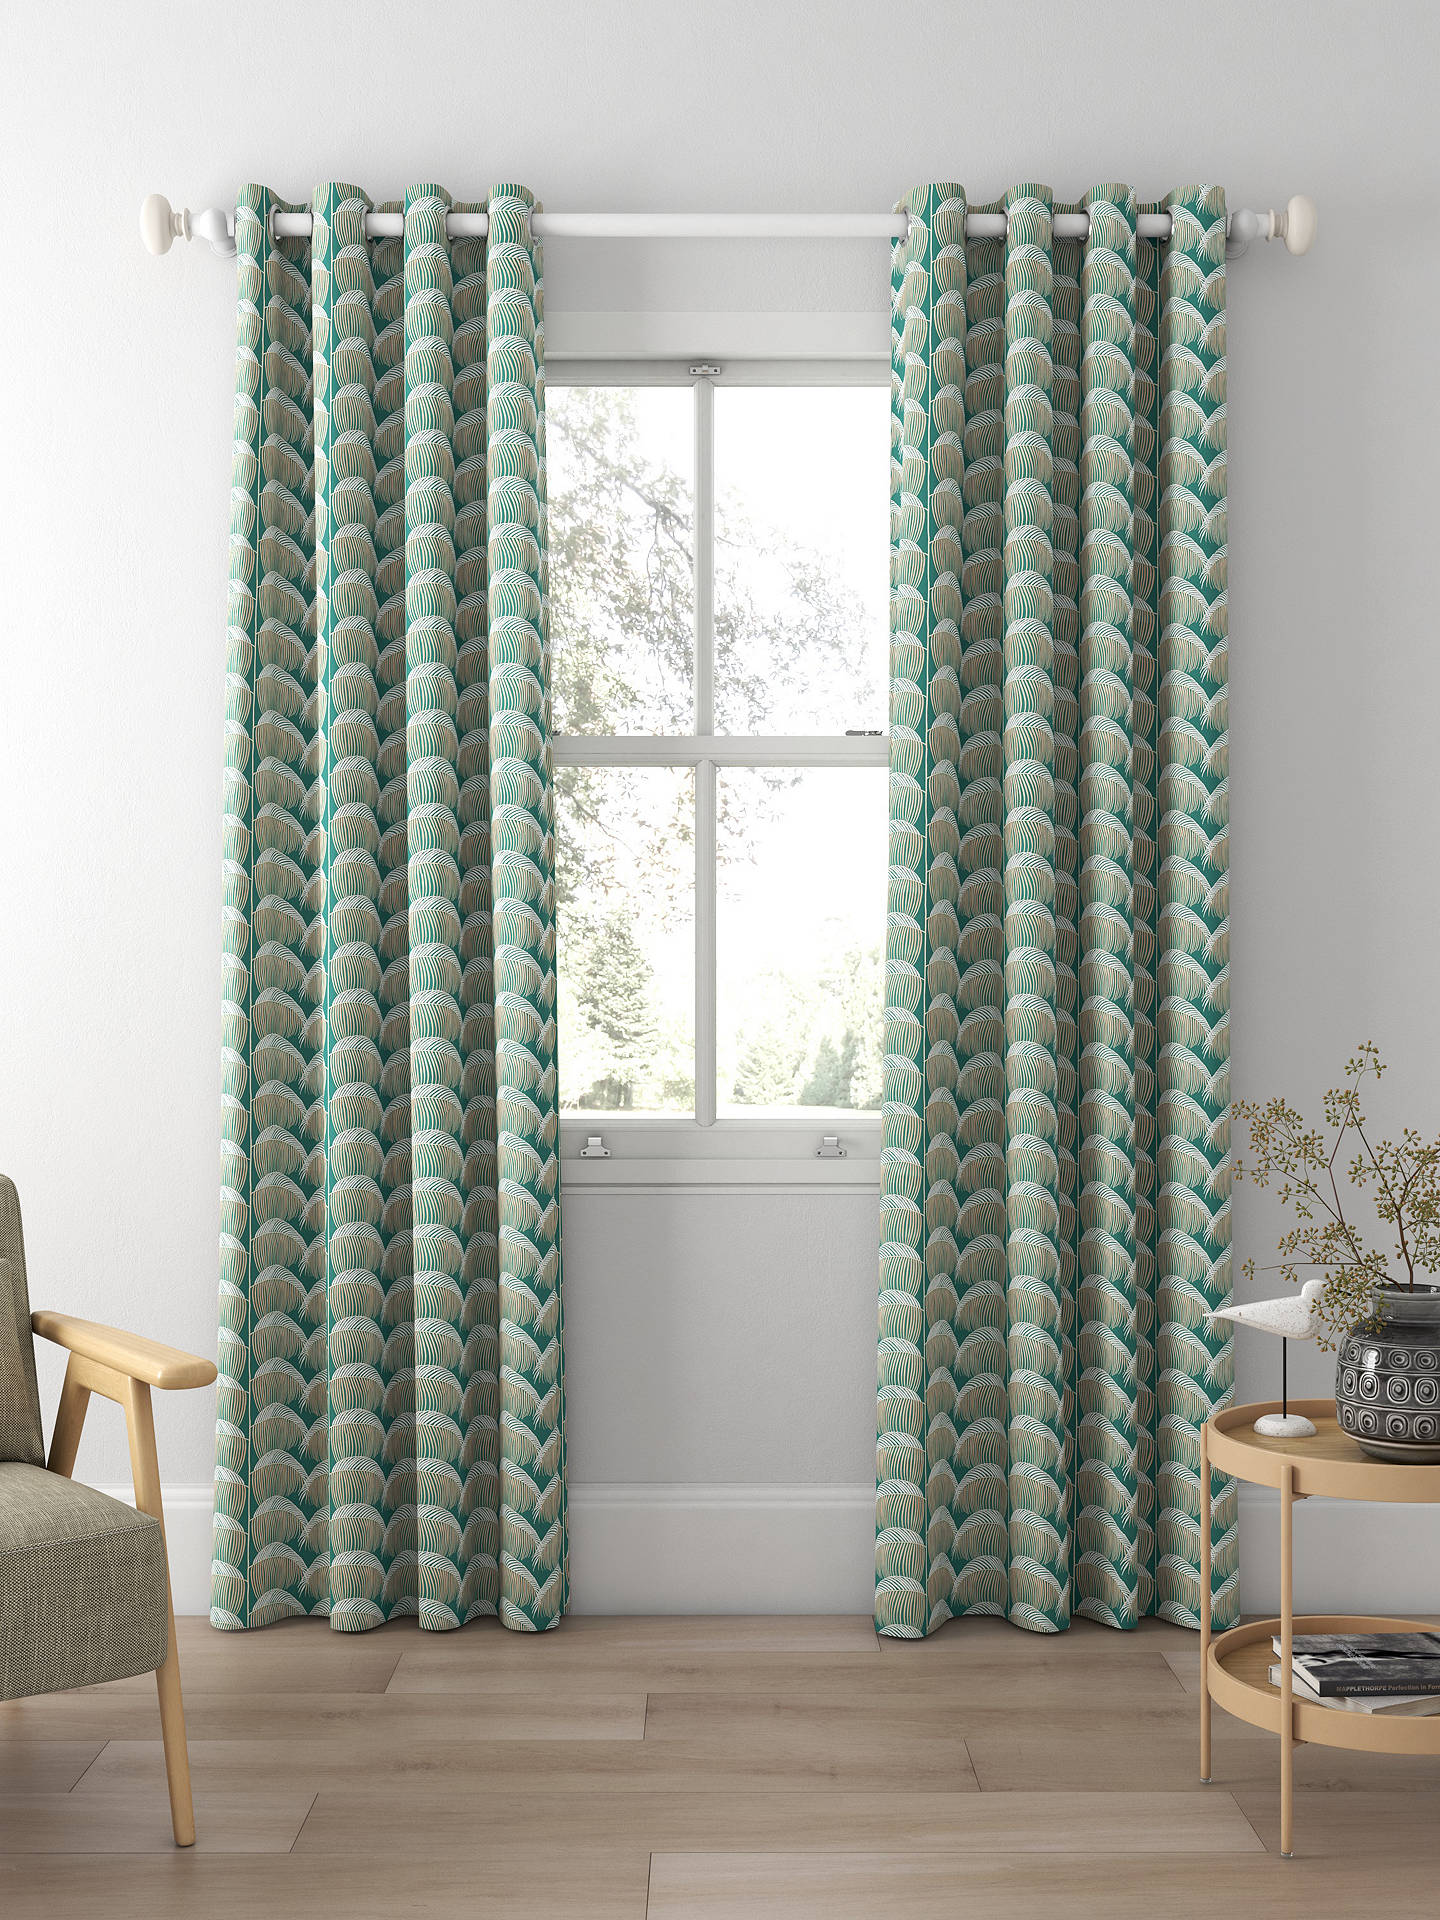 Sanderson Manilla Embroidery Made to Measure Curtains, Eucalyptus